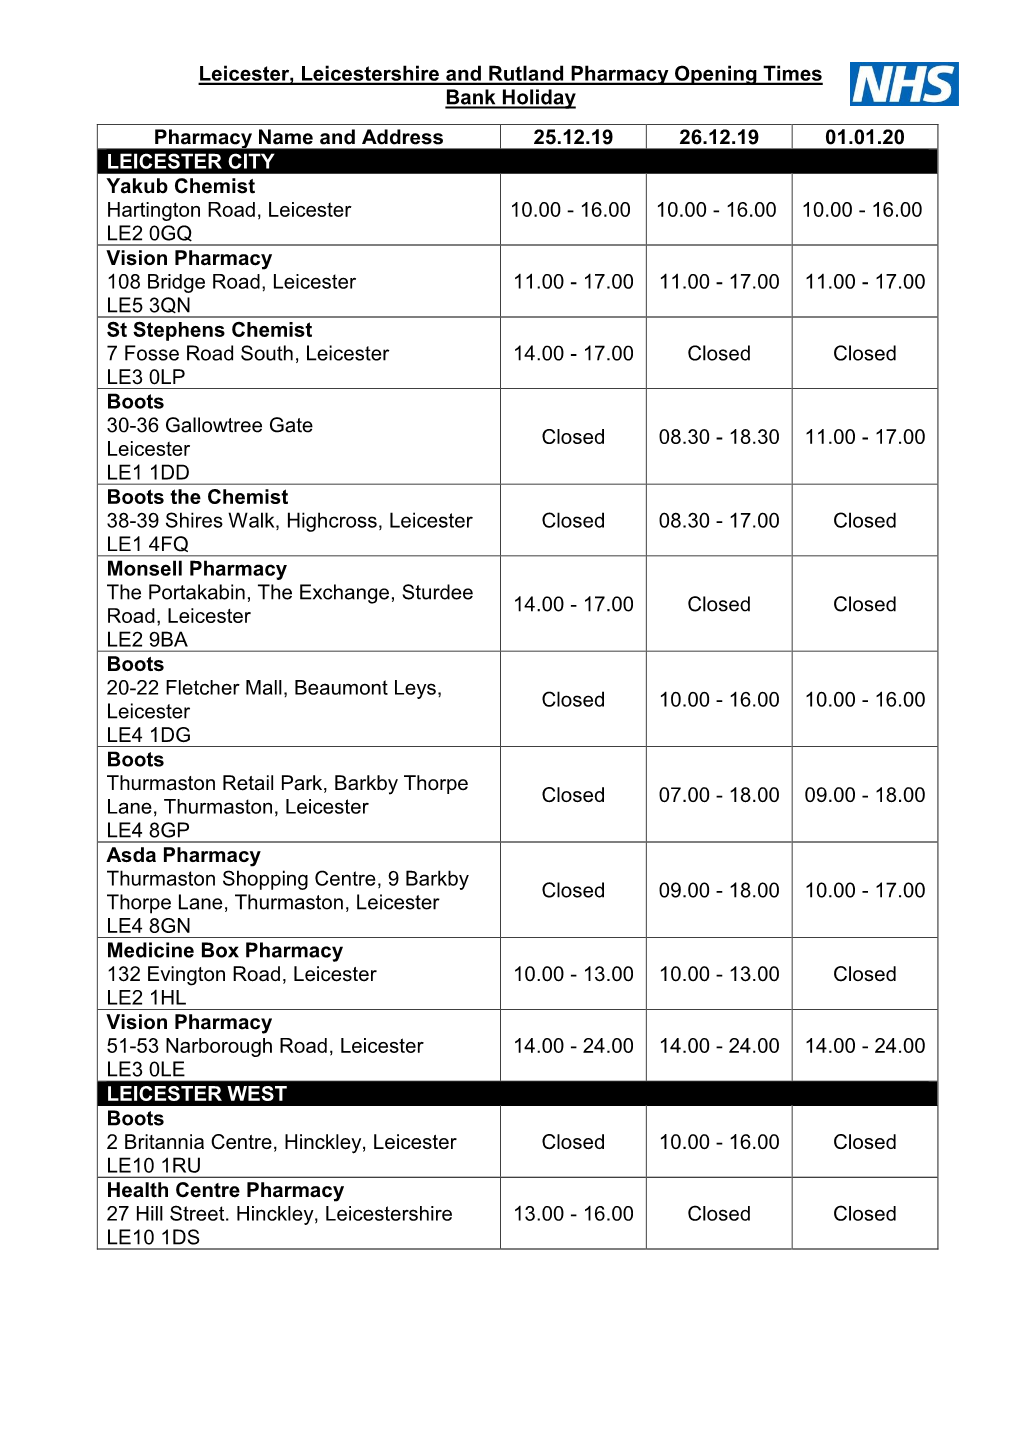 Leicester, Leicestershire and Rutland Pharmacy Opening Times Bank